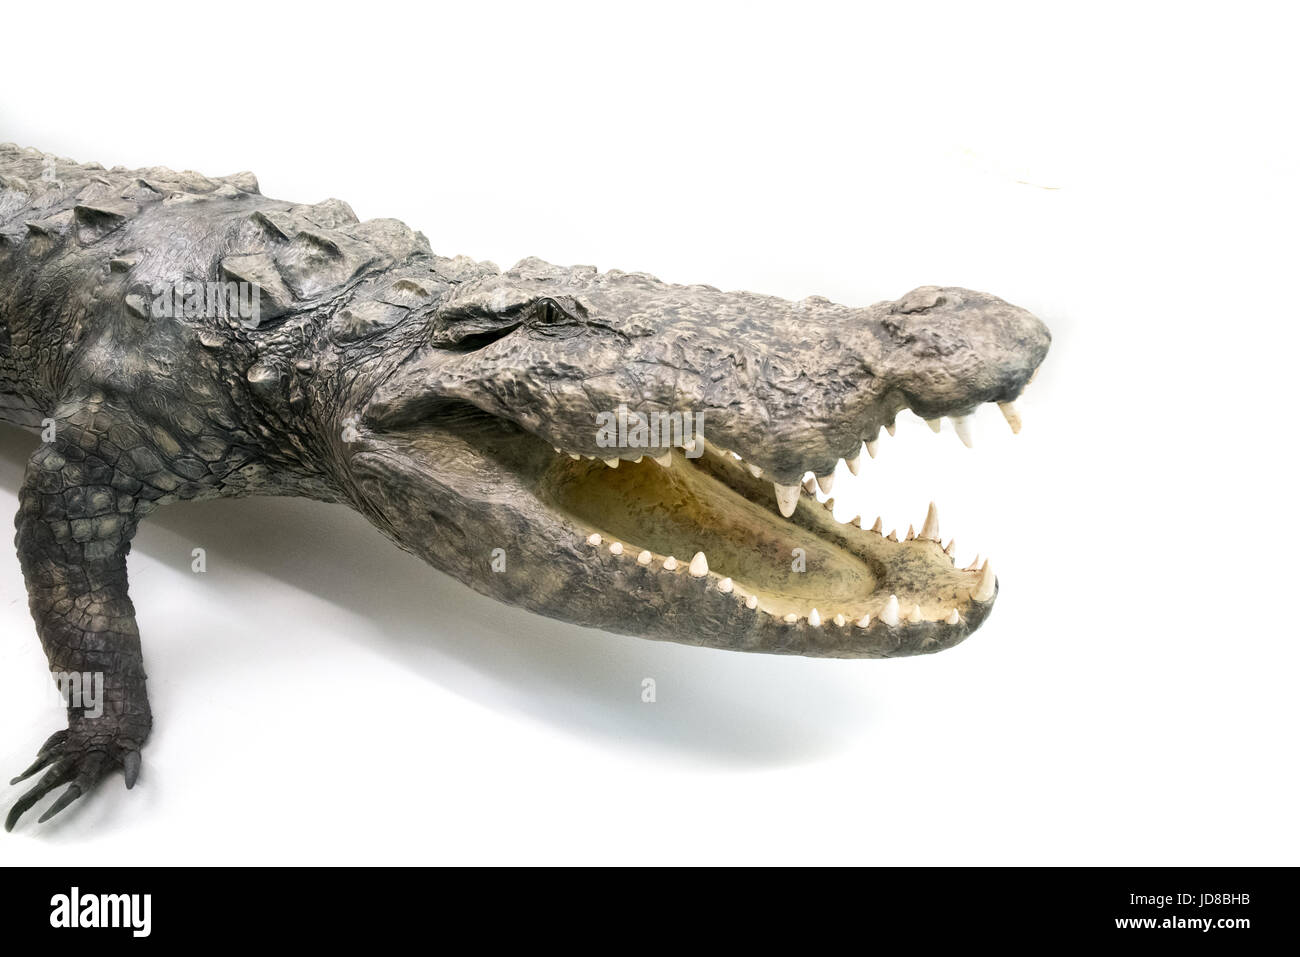 Portrait of an alligator against a plain white background, studio shot. stuffed animal isolated colour picture Stock Photo